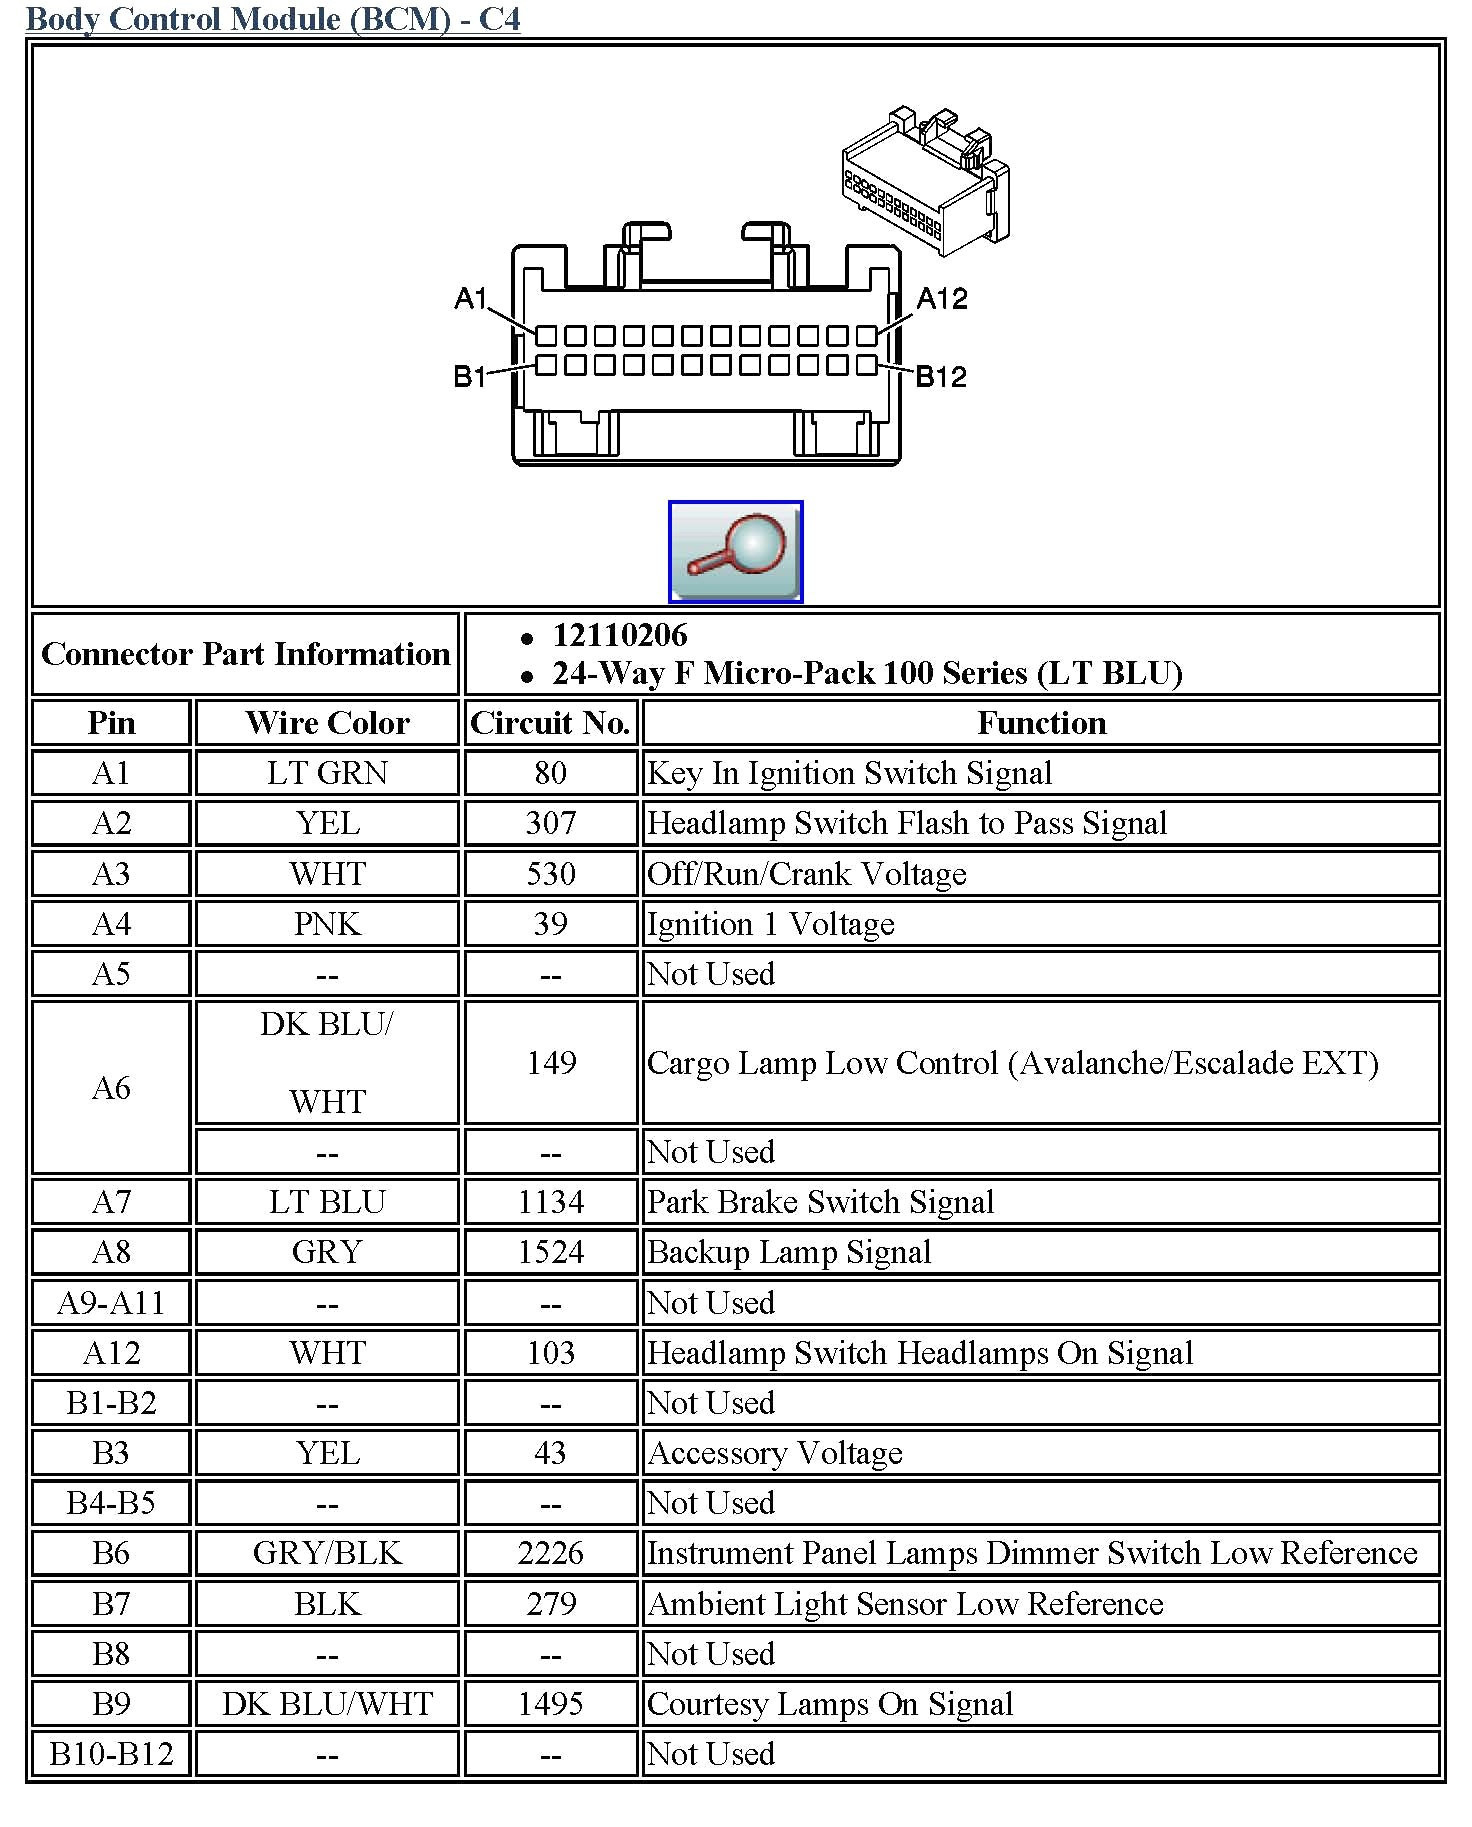 2004 Chevy Cavalier Wiring Diagram Rate Stereo Wiring Harness - 2004 Chevy Cavalier Stereo Wiring Diagram